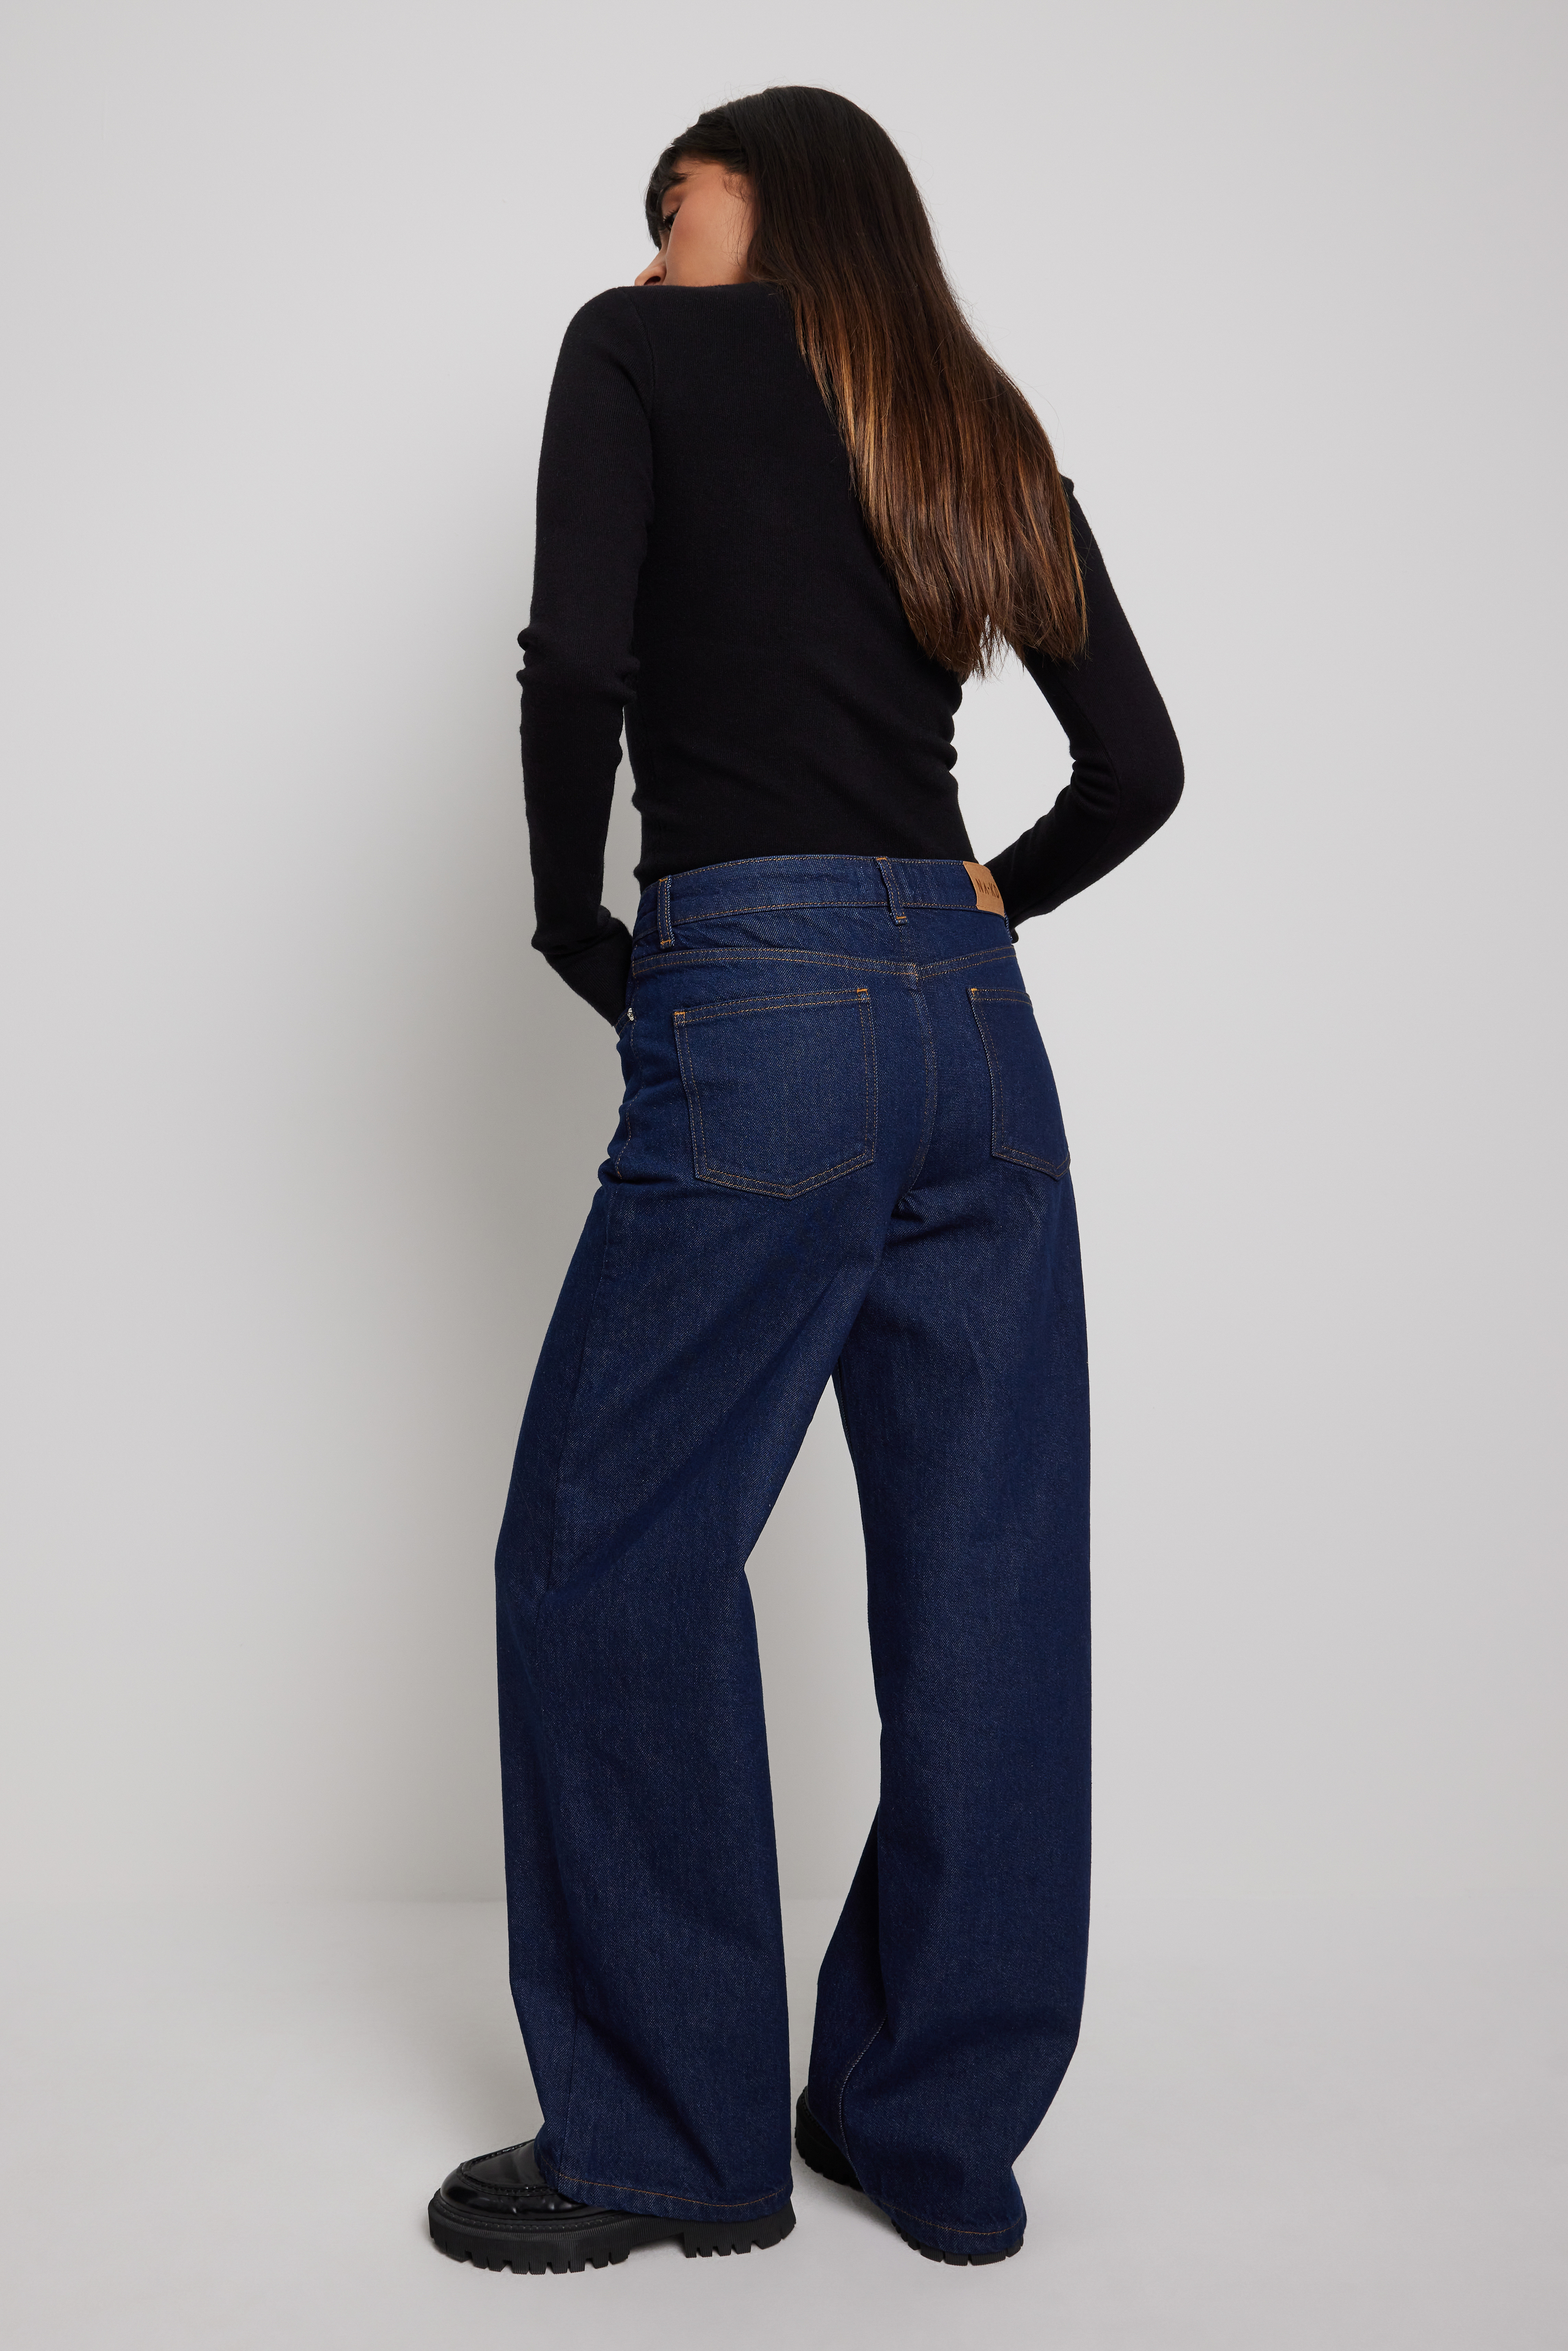 Mode Jeans Jeans taille basse Fishbone Jeans taille basse bleu style d\u00e9contract\u00e9 